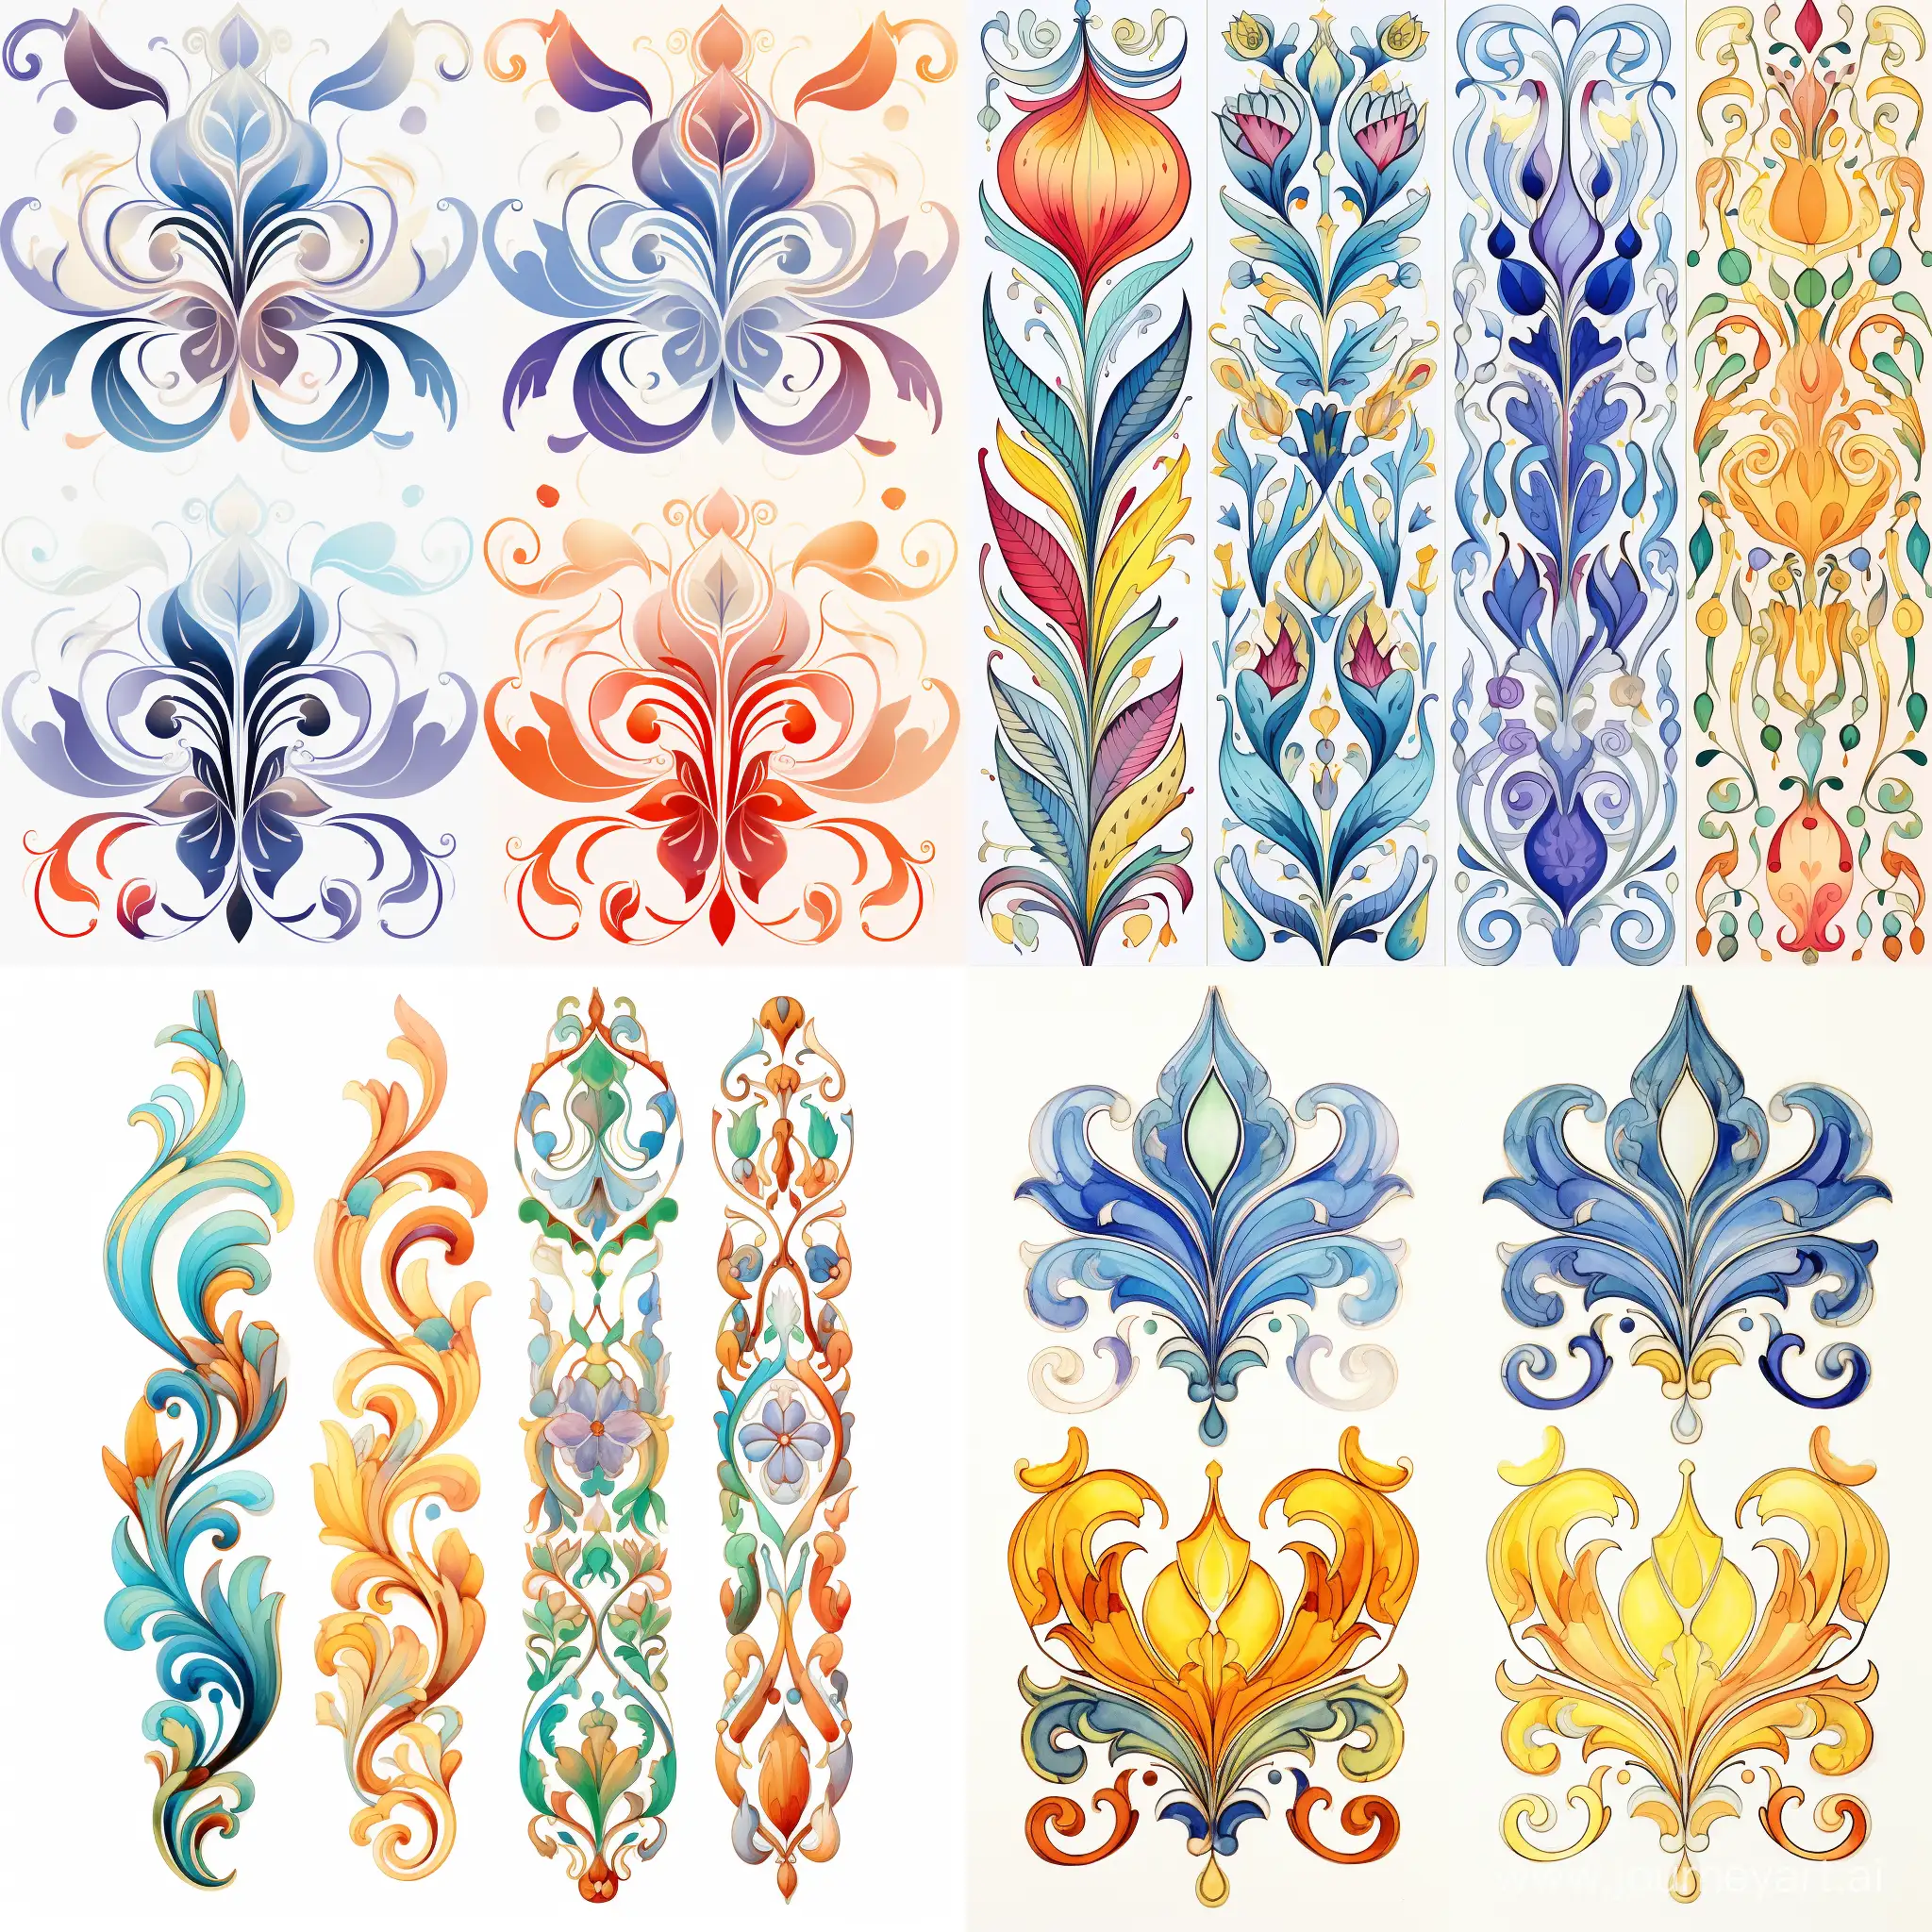 Four variations of ornament pattern, stylized caricature, Vikto Ngai, watercolor, decorative, flat drawing